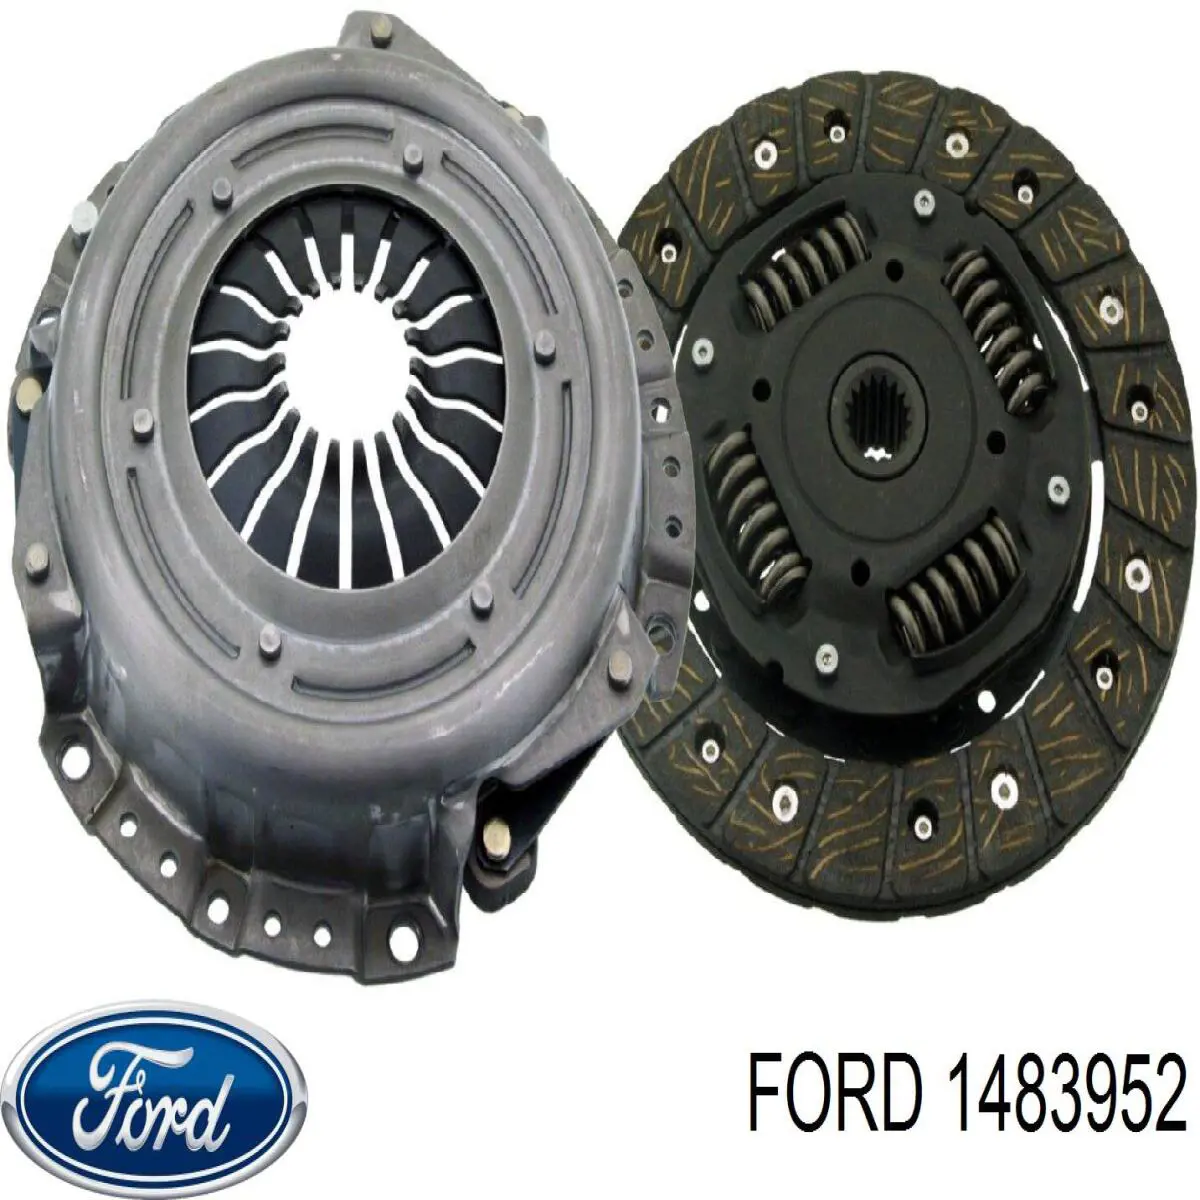 1483952 Ford embrague